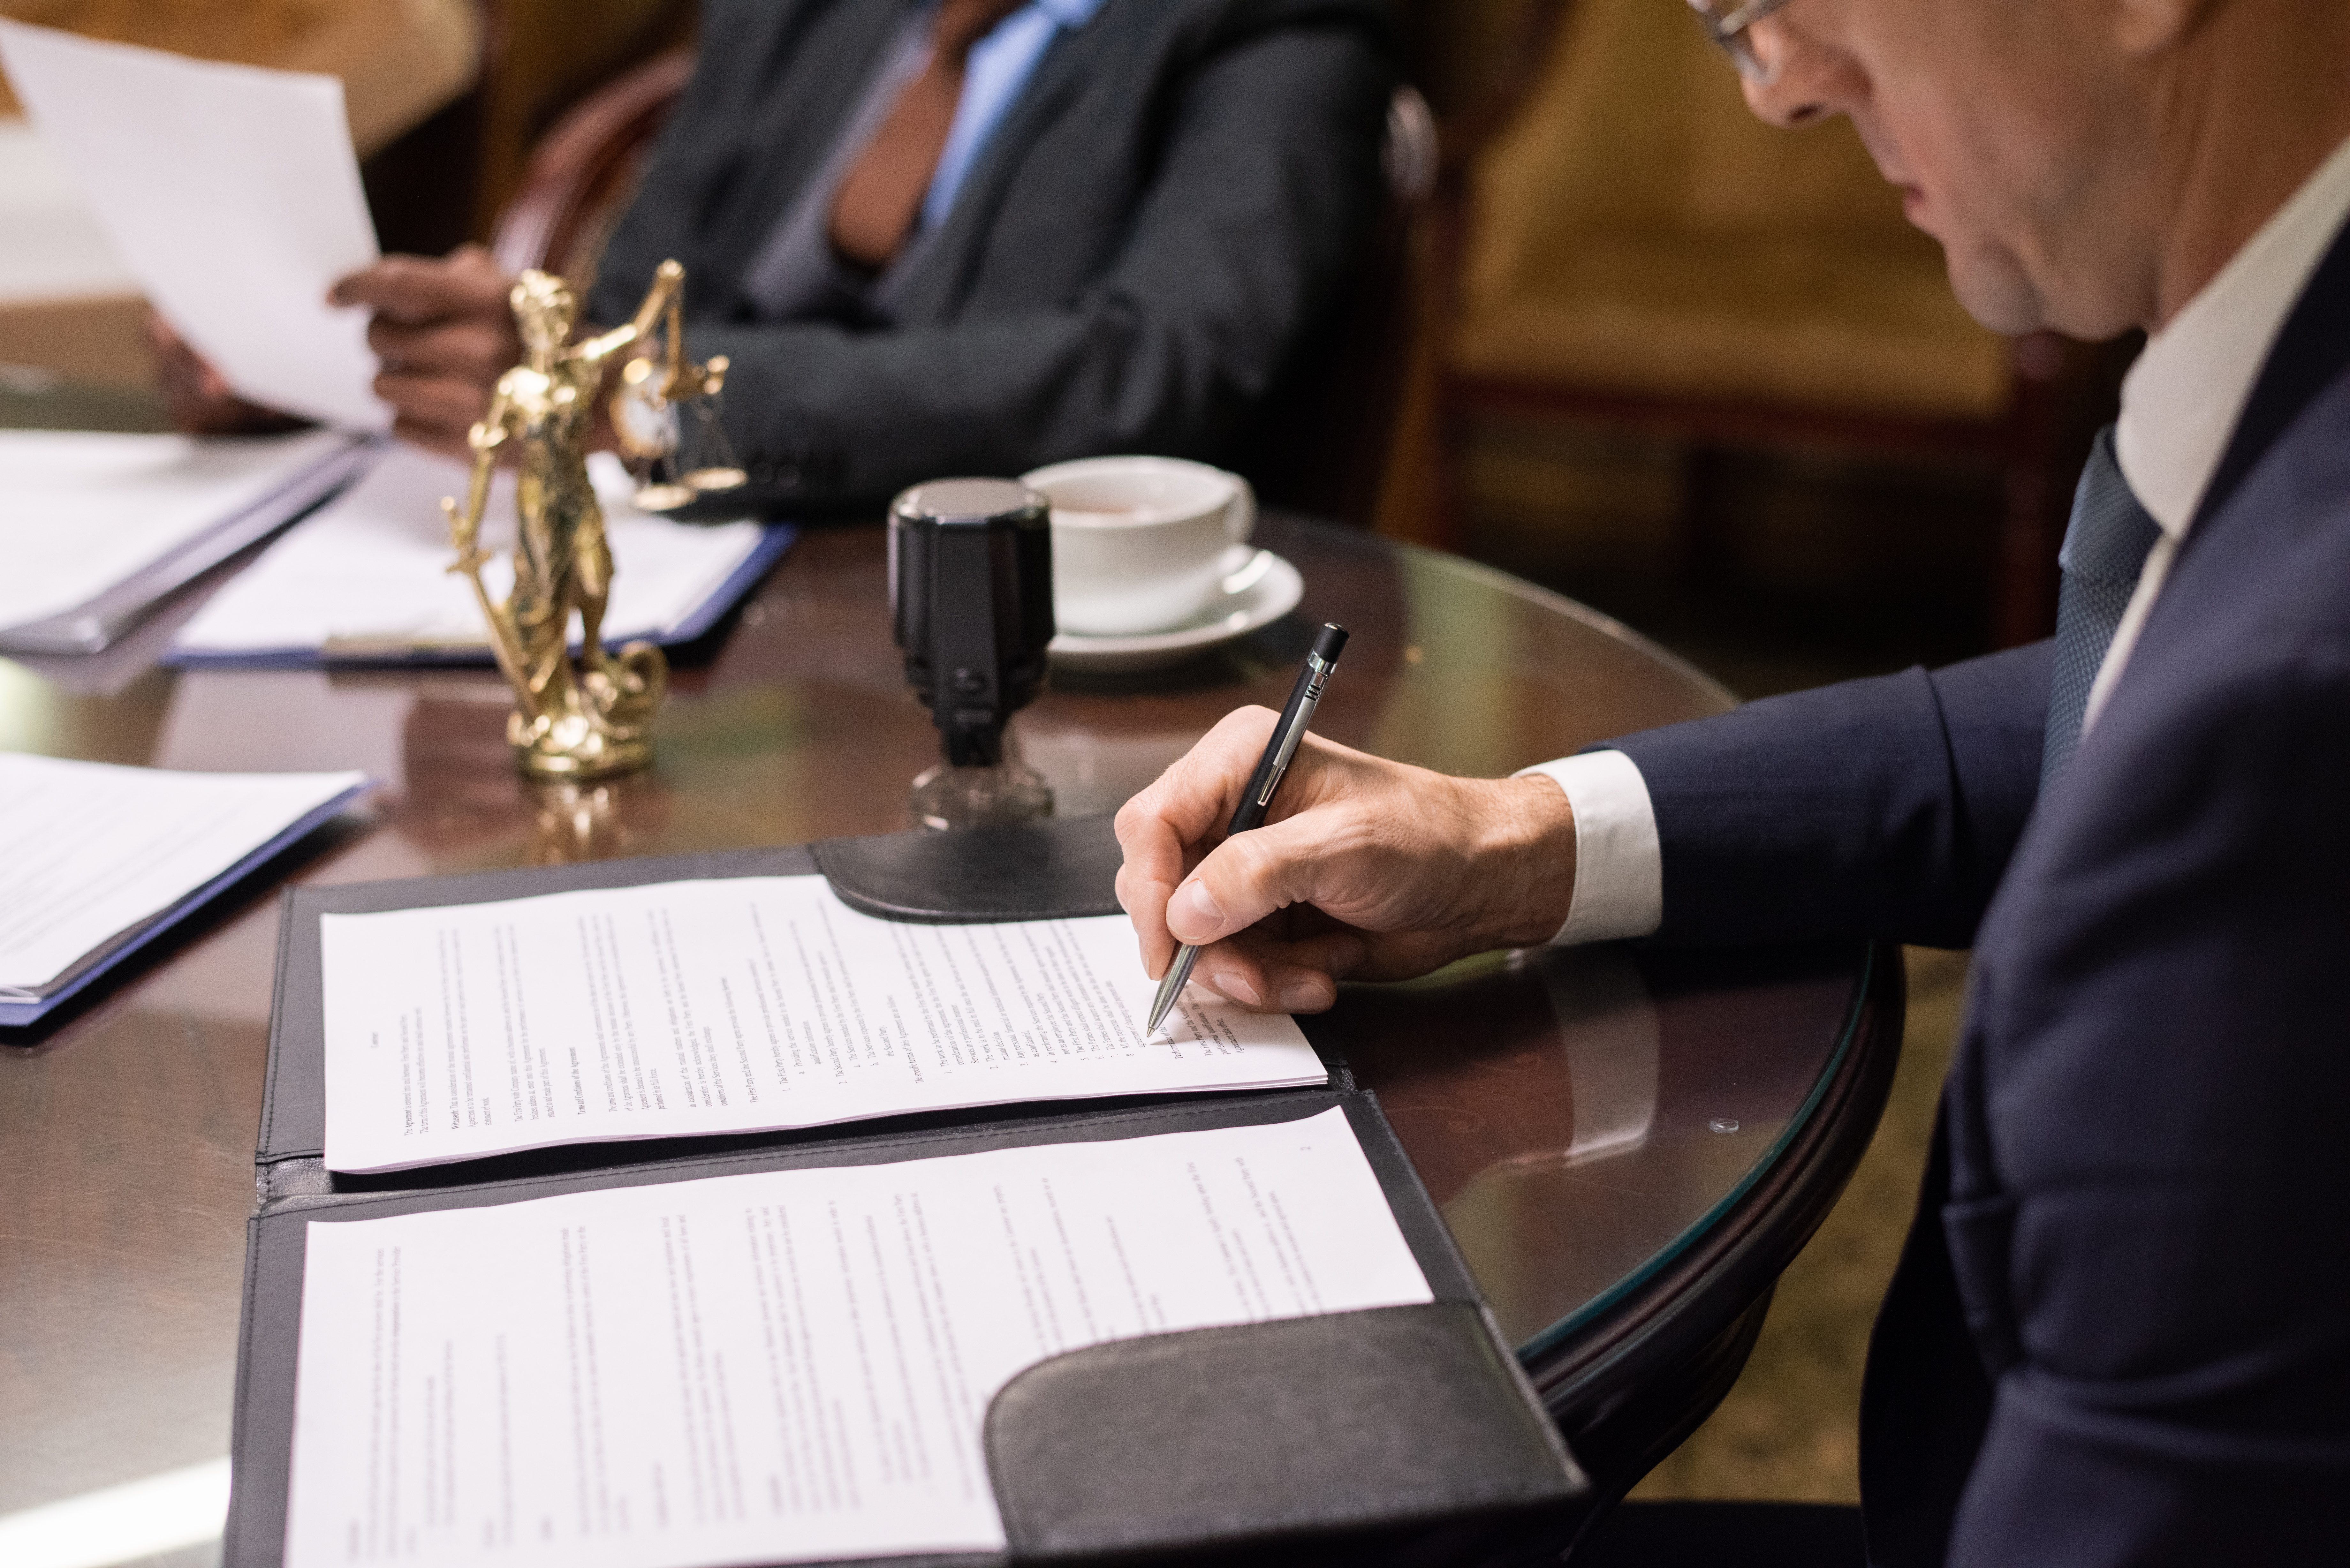 Mature businessman or jurist signing document by workplace